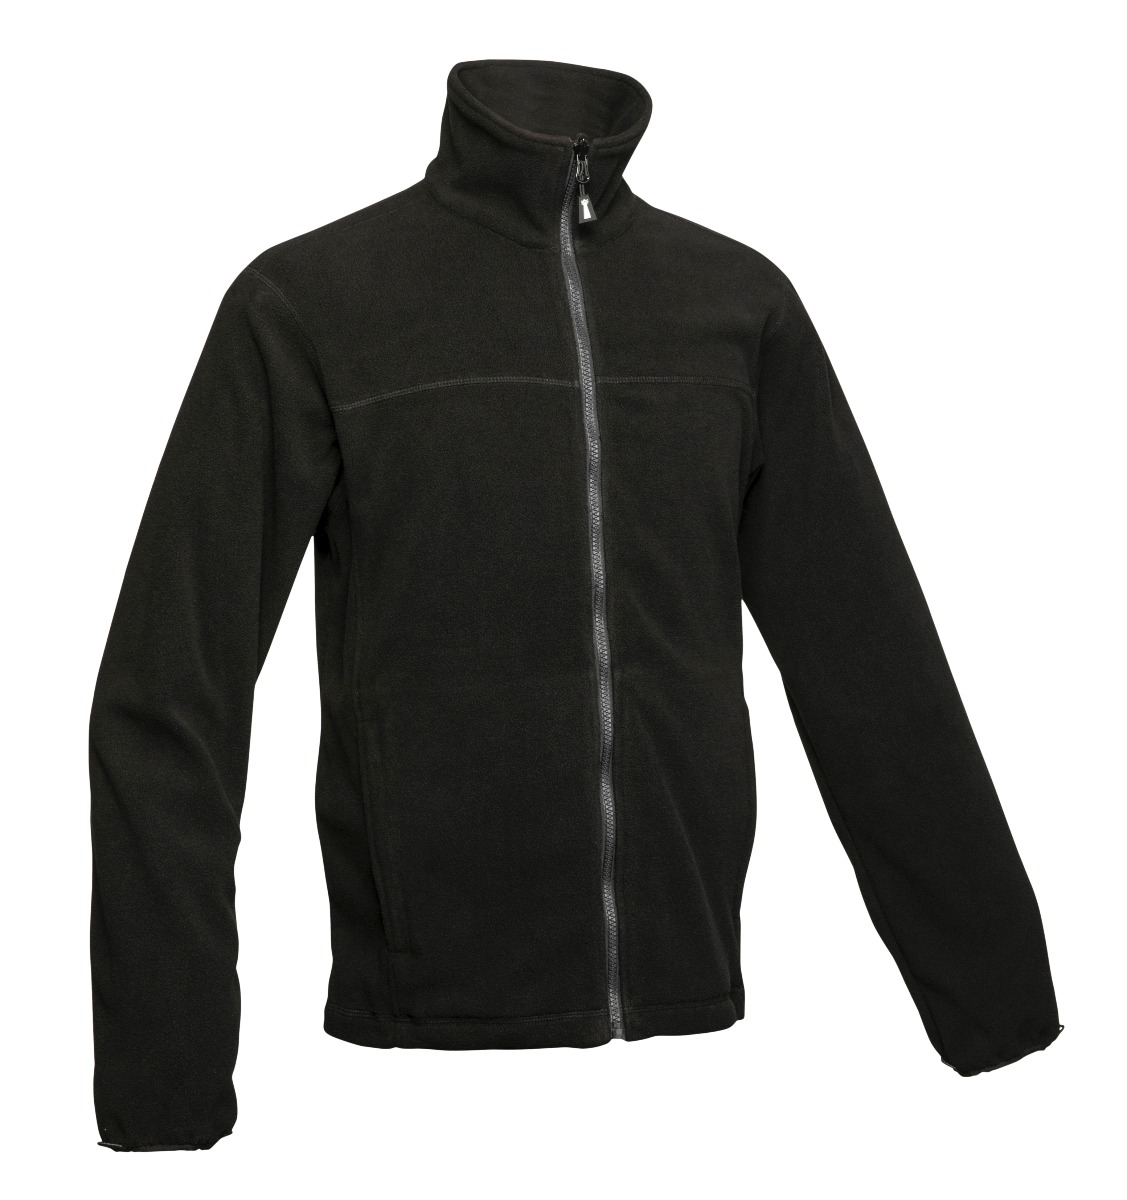 REYES 3-IN-1 UNISEX JACKET - Boost Promotions